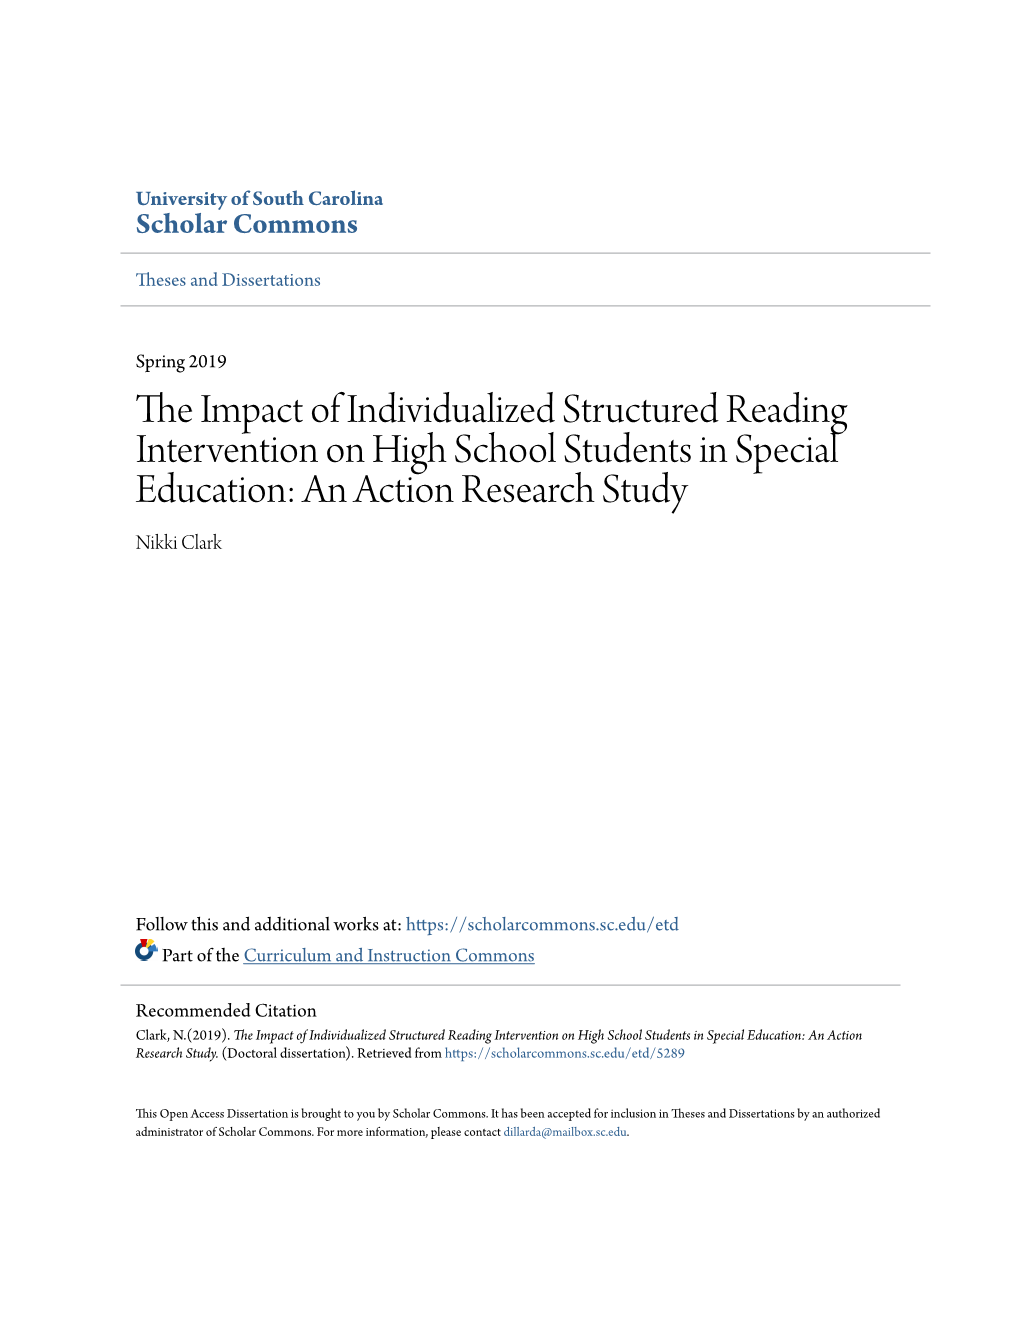 The Impact of Individualized Structured Reading Intervention on High School Students in Special Education: an Action Research Study